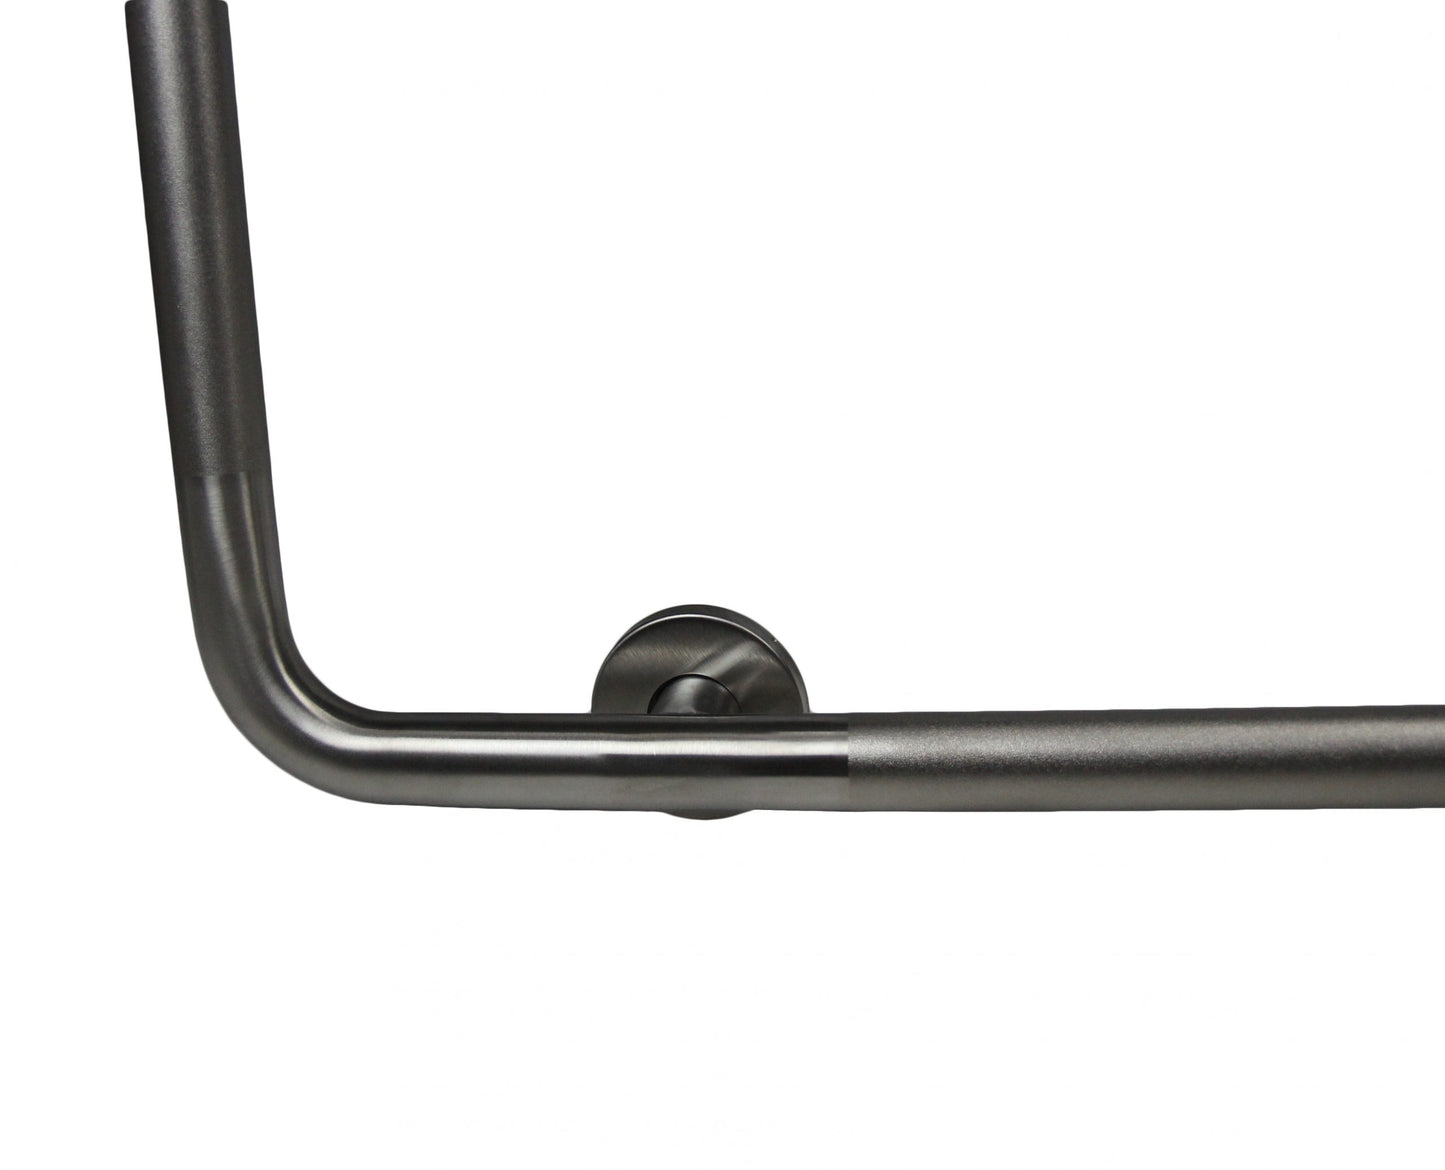 Frost grab bar right angle flange view